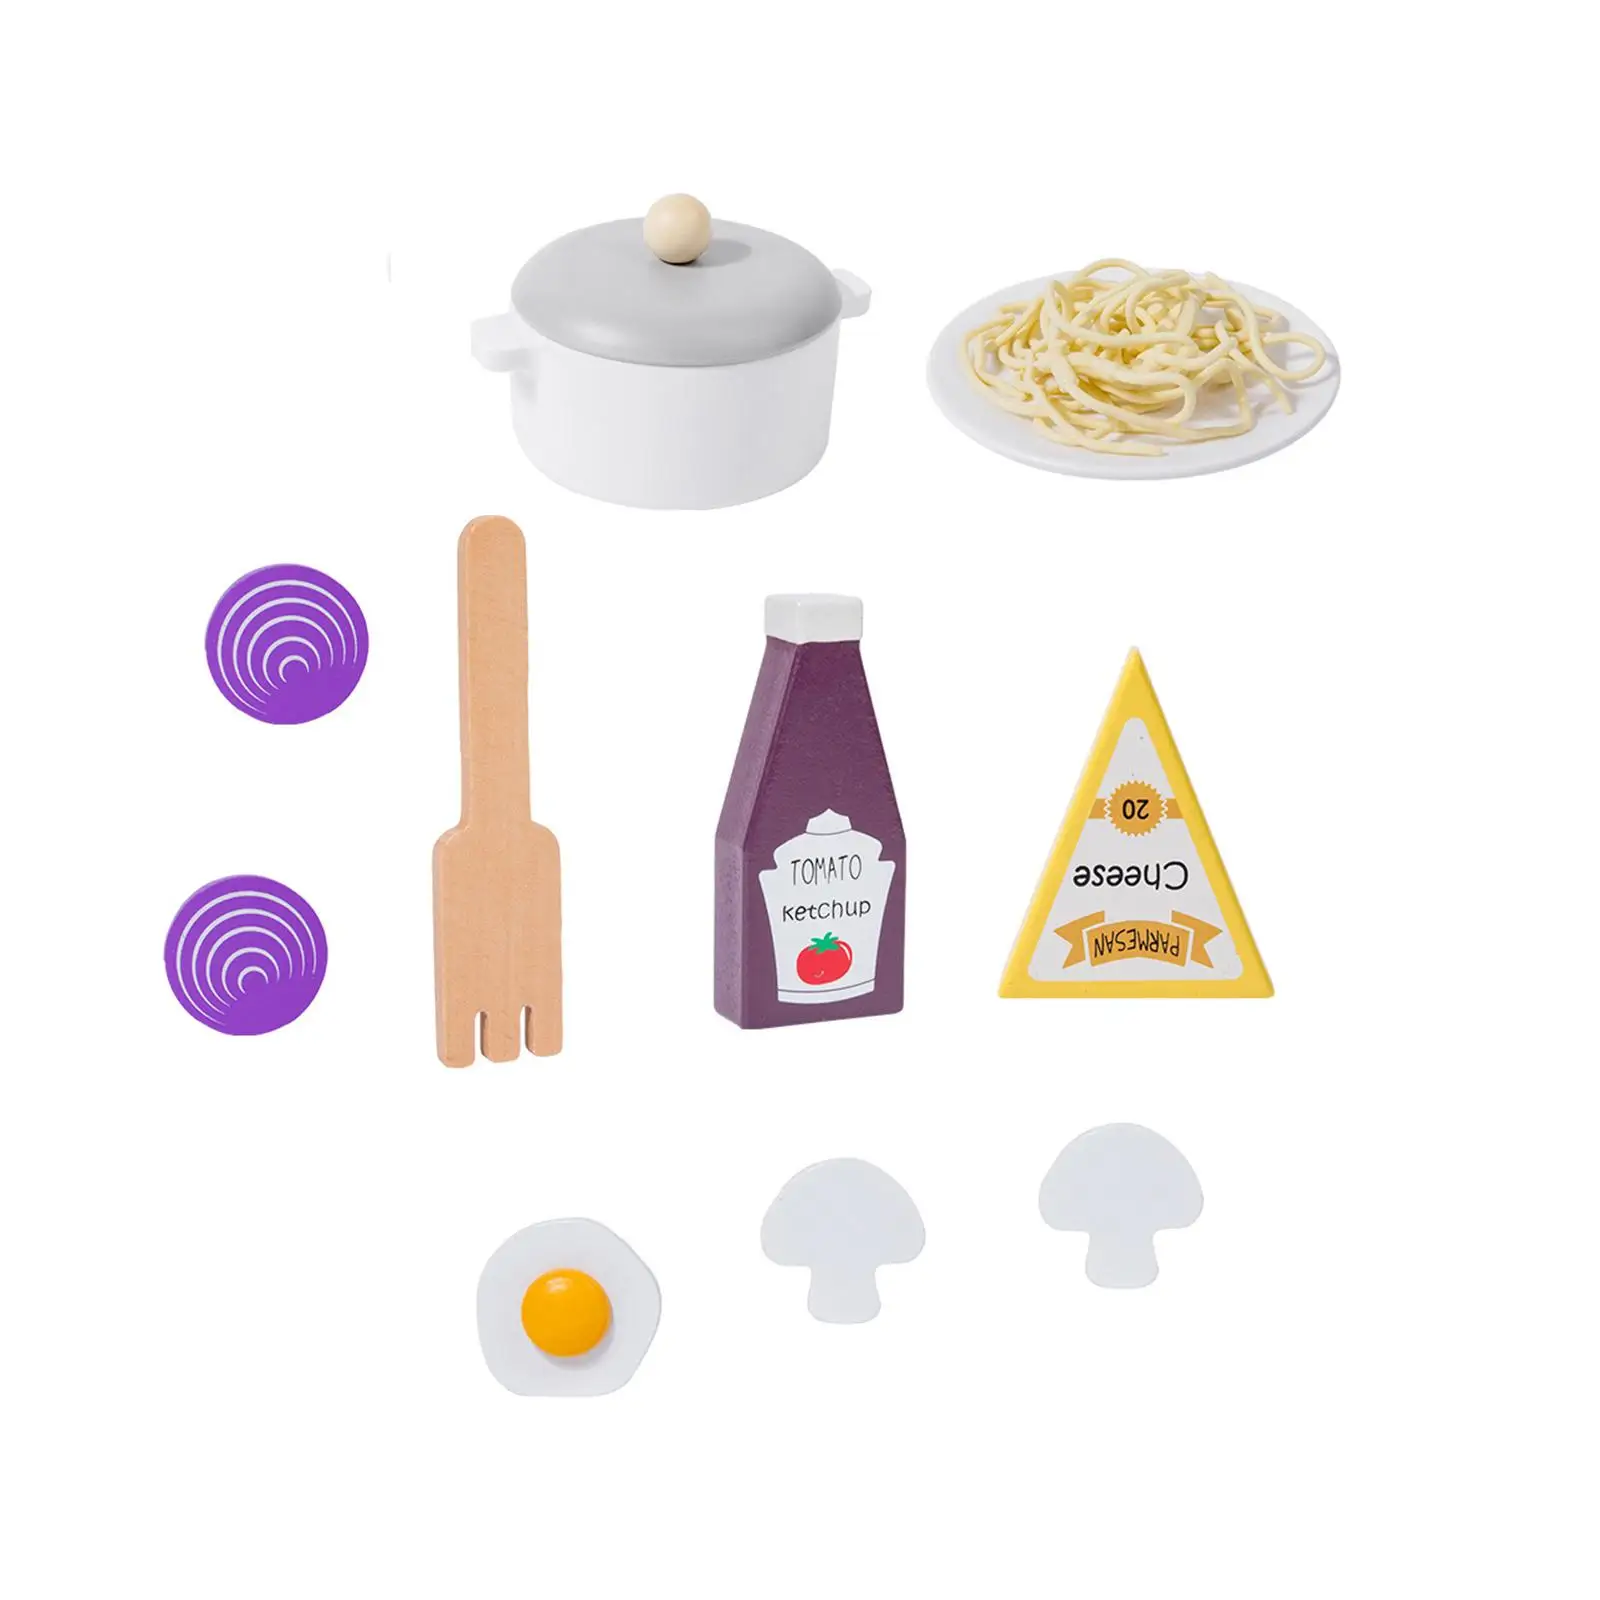 Pretend Play Kitchen Toys Wooden Kitchen Noodle Toys for DIY Model Crafts